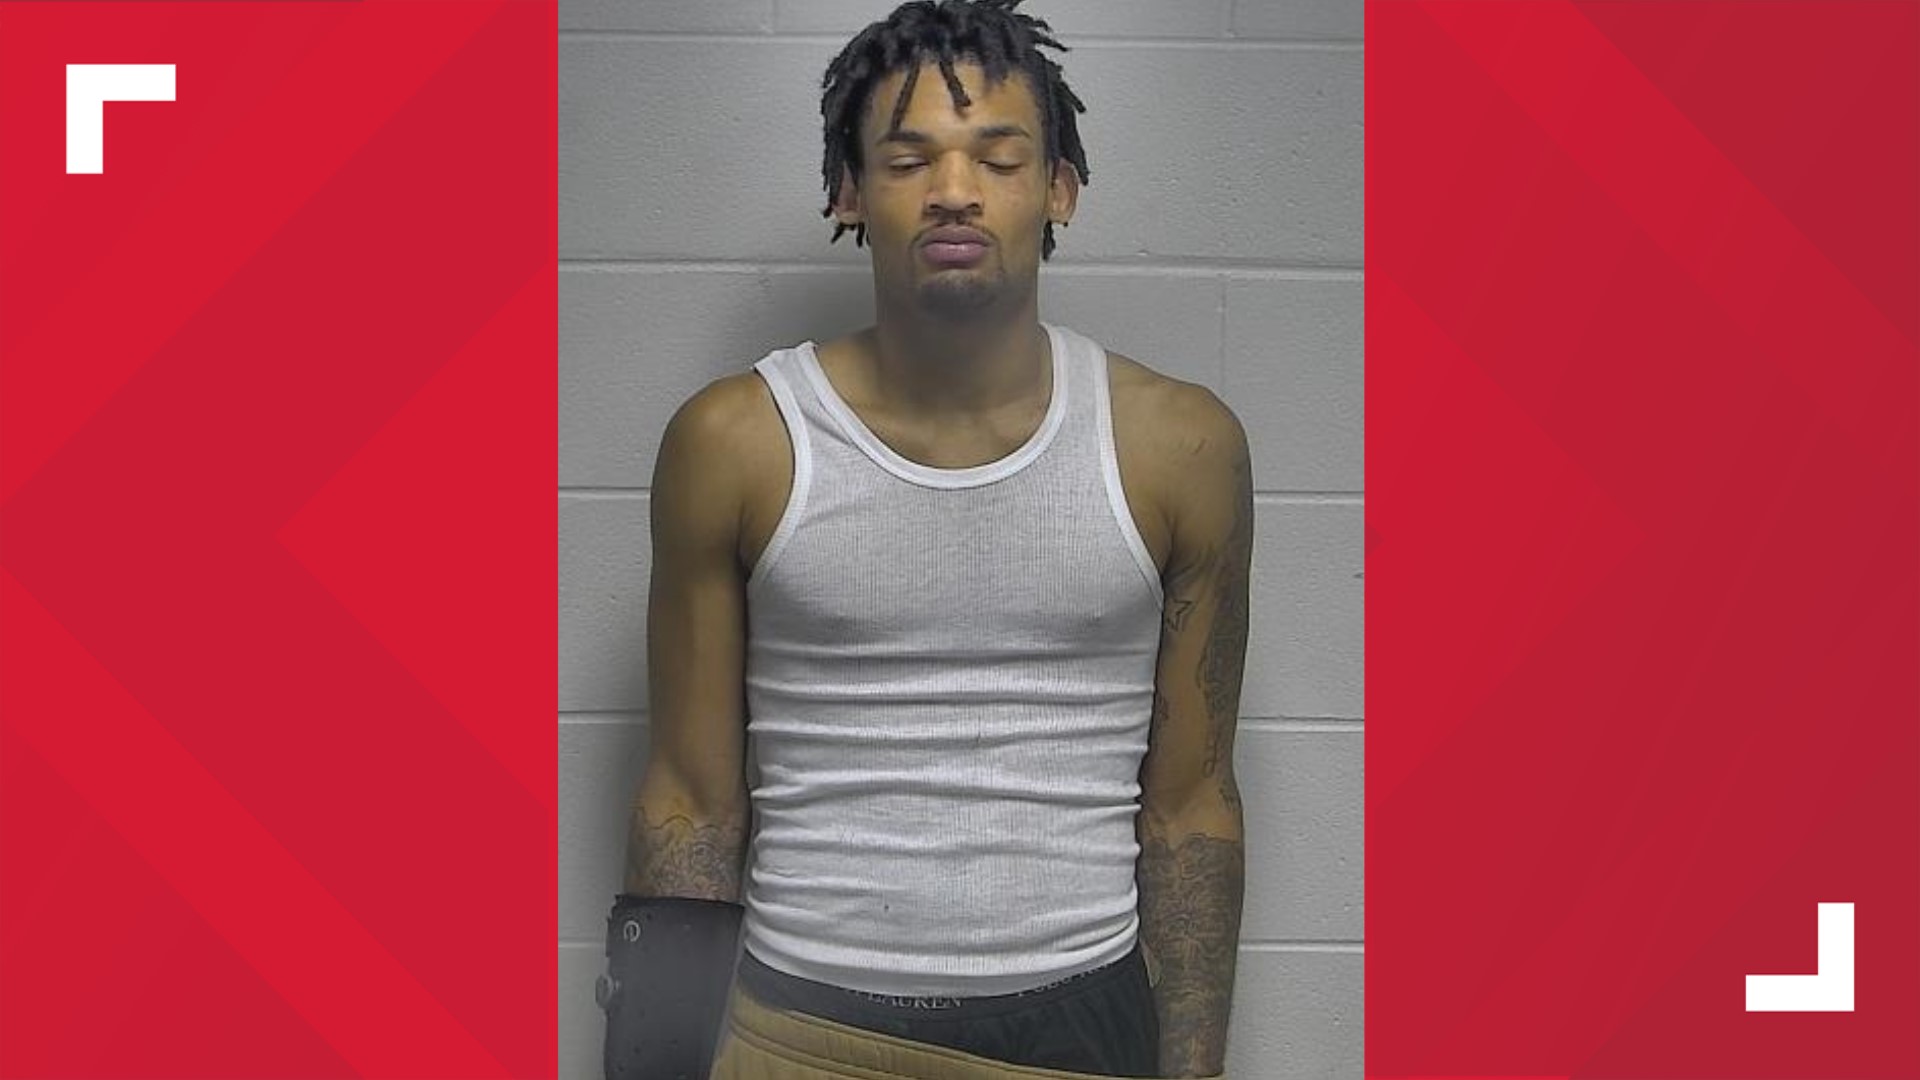 Tymetrius Walter was charged with murder, first-degree wanton endangerment, receiving stolen property of over $10,000, first-degree assault and more.